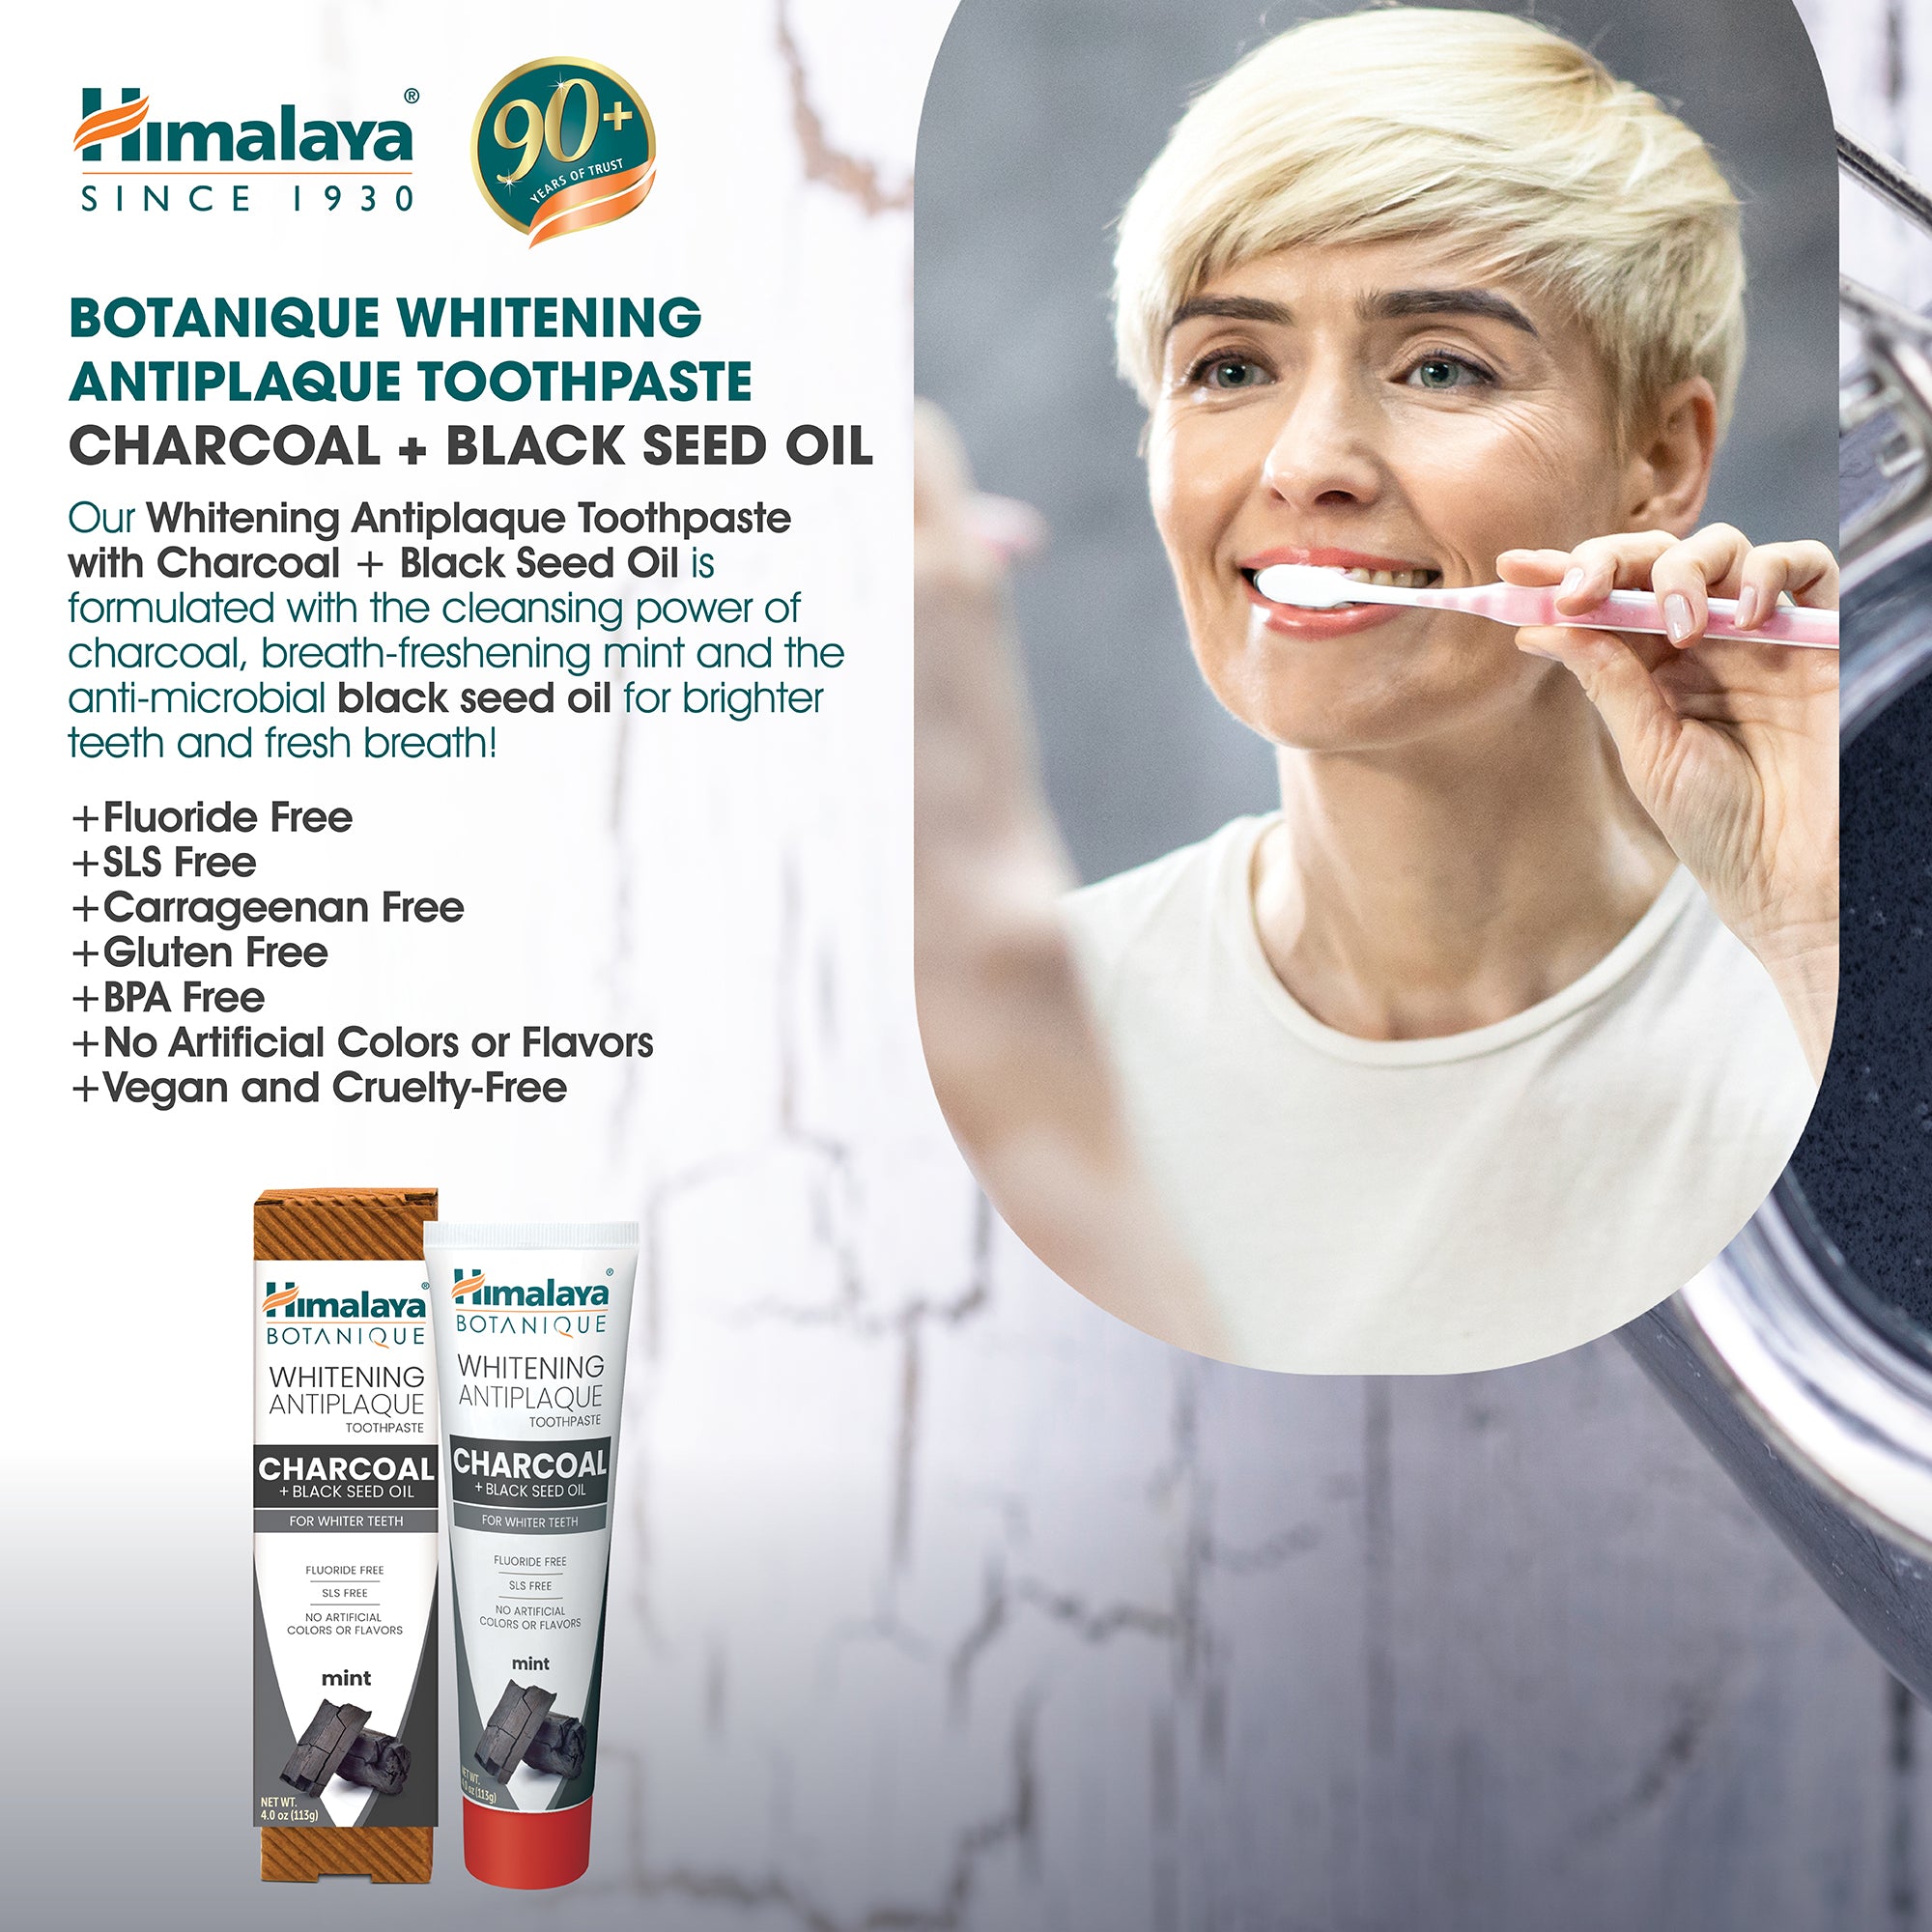 Himalaya Botanique Whitening Antiplaque Toothpaste Charcoal + Black Seed Oil 113G (Pack of 2)